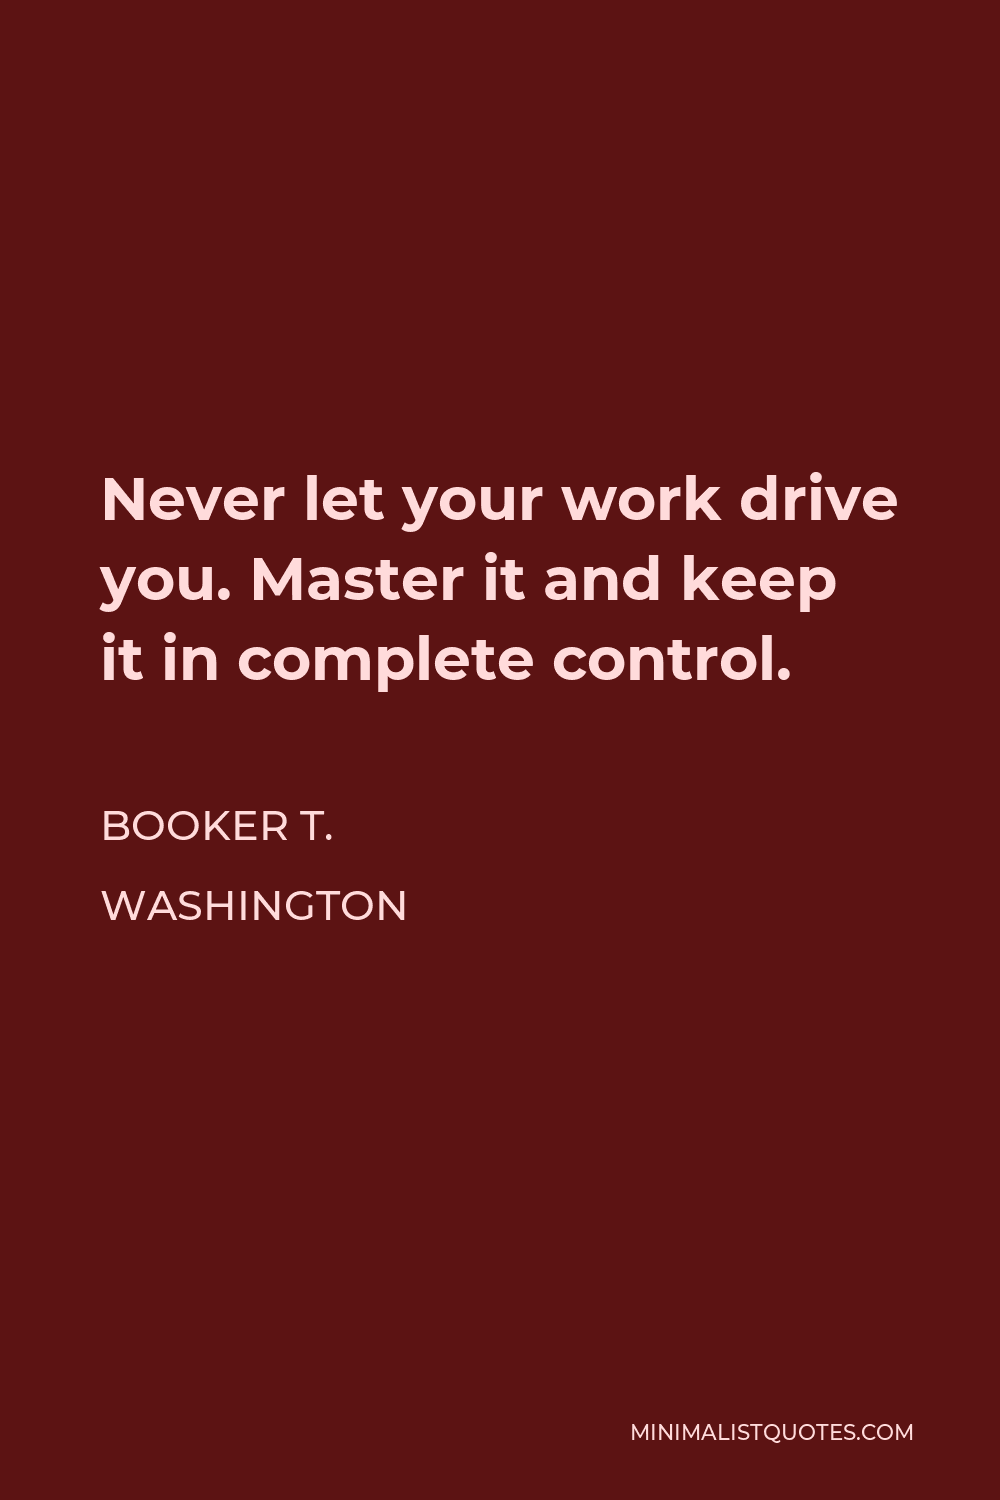 Booker T. Washington Quote - Never let your work drive you. Master it and keep it in complete control.